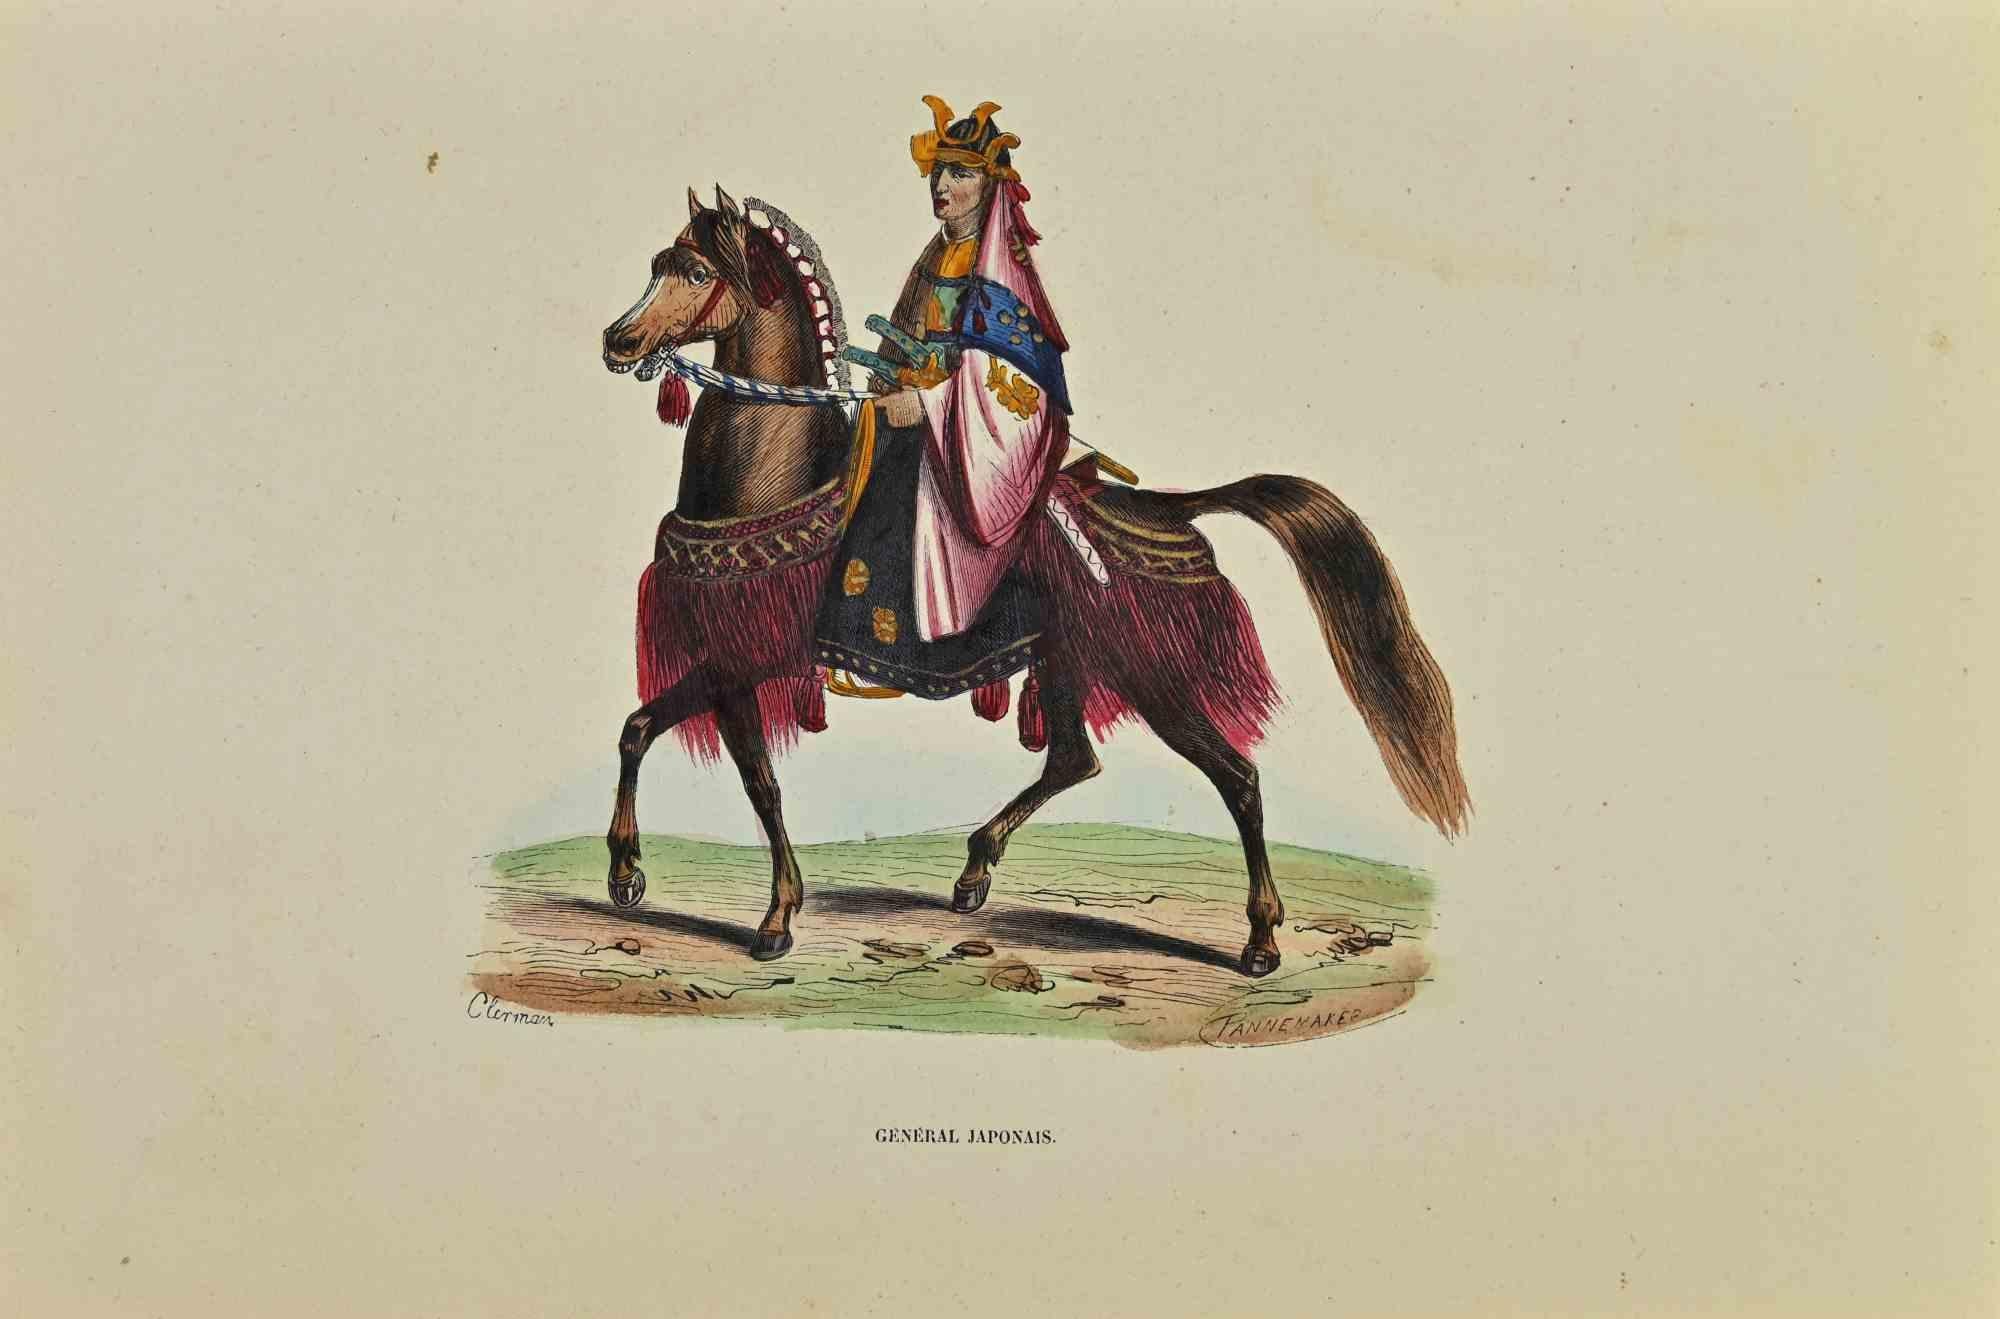 Japanese General is a lithograph made by Auguste Wahlen in 1844.

Hand colored.

Good condition.

At the center of the artwork is the original title "General Japonais".

The work is part of Suite Moeurs, usages et costumes de tous les peuples du